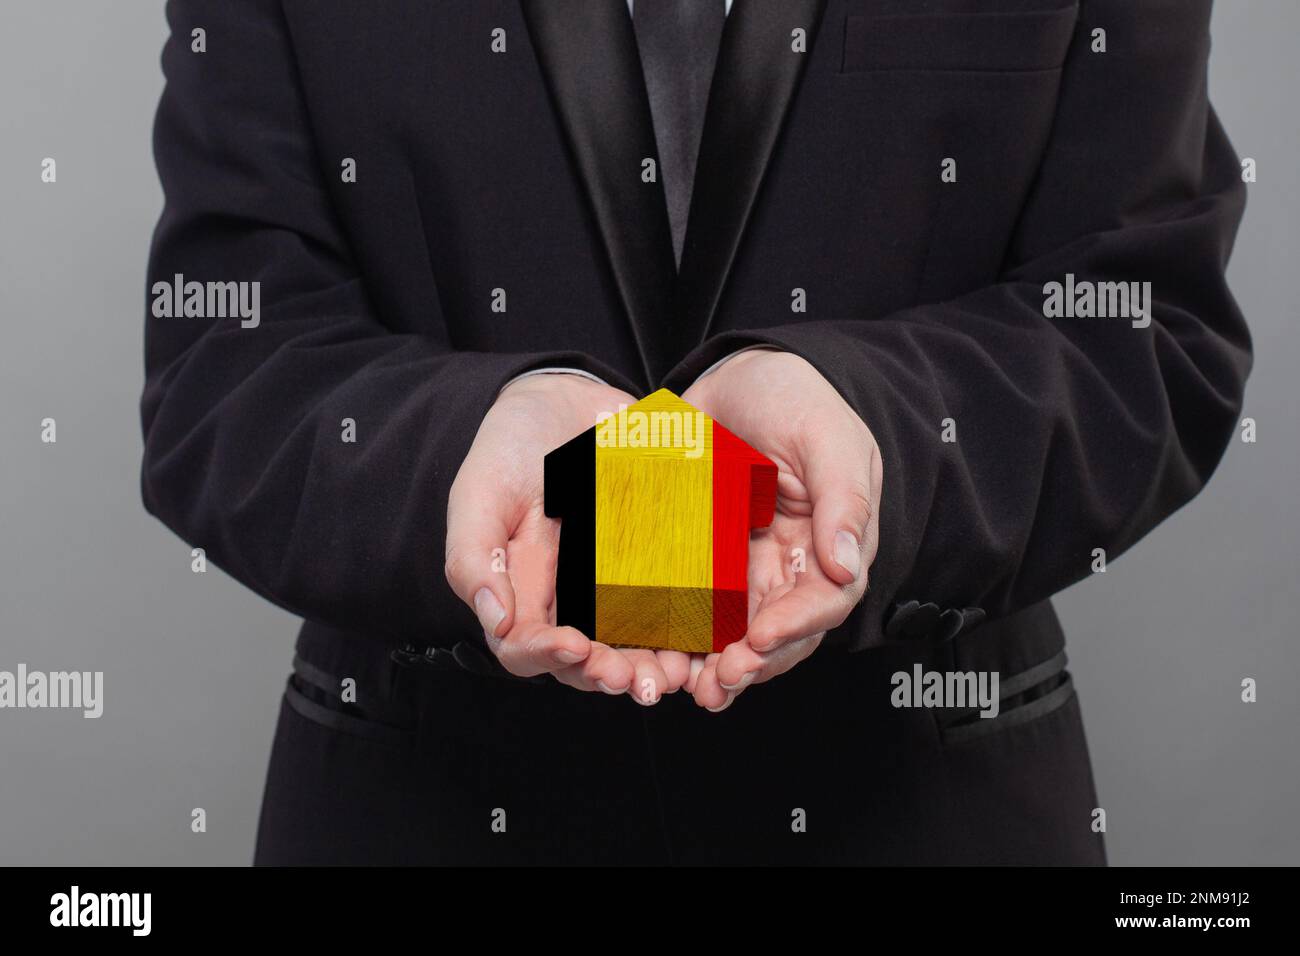 Belgian person holding wooden house with flag of Belgium Finance, investment, mortgage, loan and credit concept Stock Photo